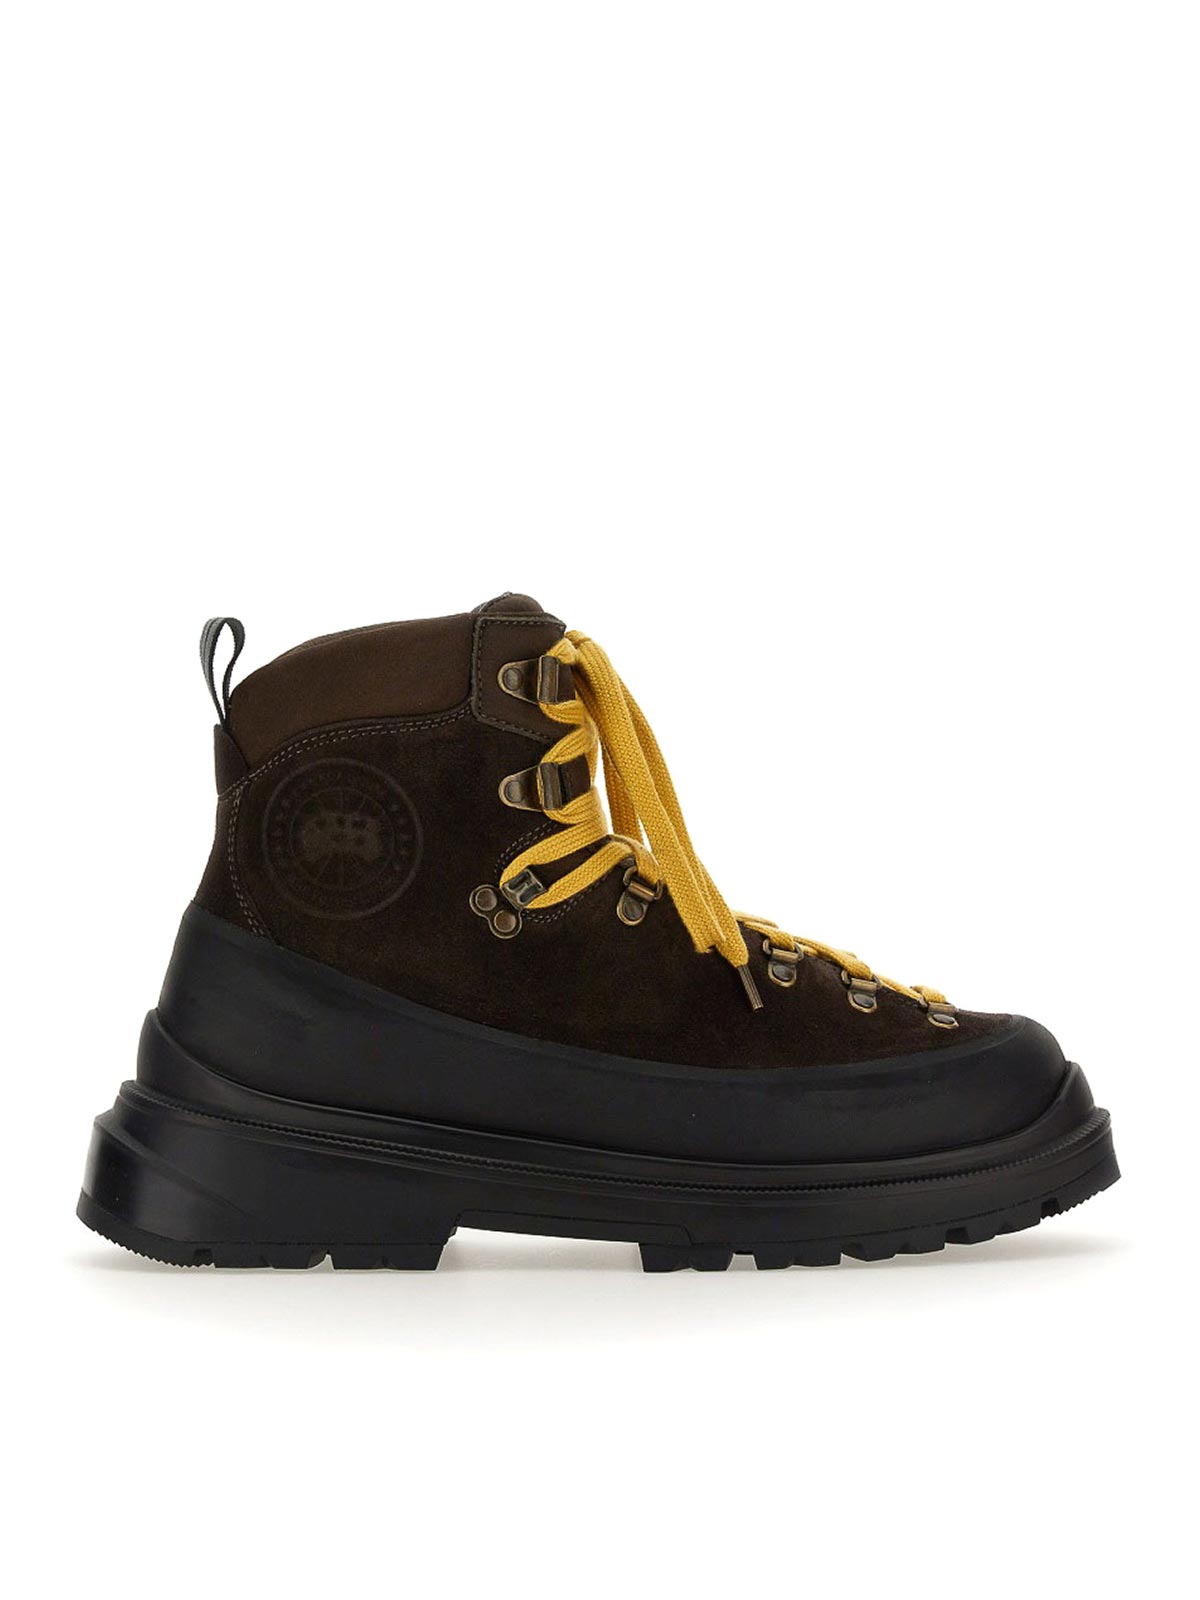 Shop Canada Goose Boots Journey In Brown